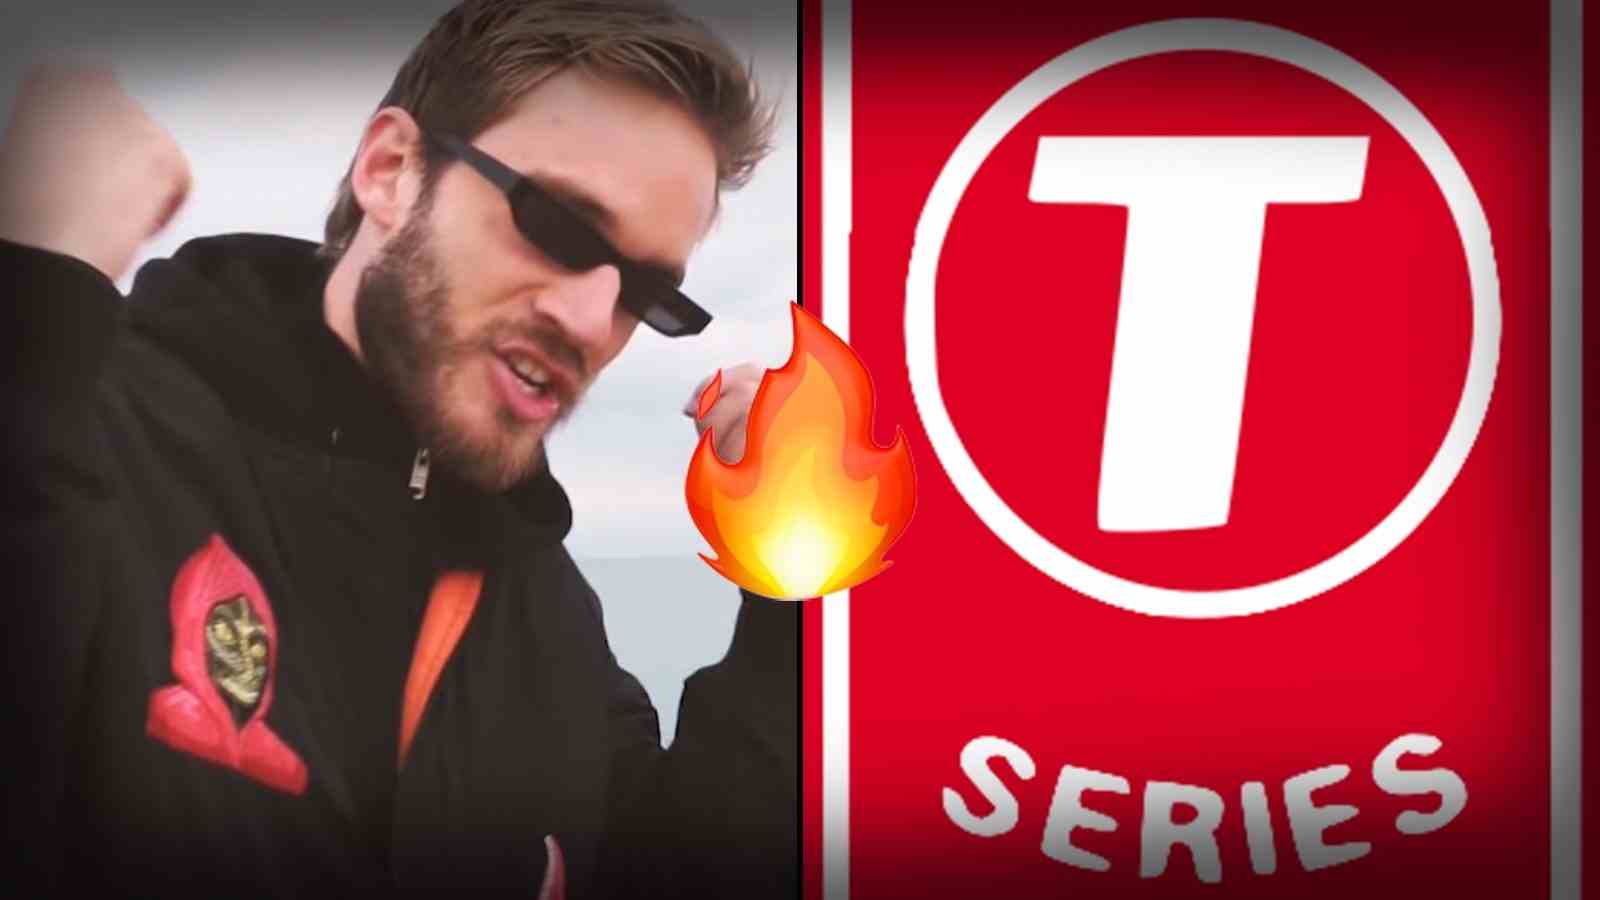 PewDiePie releases T Series diss track